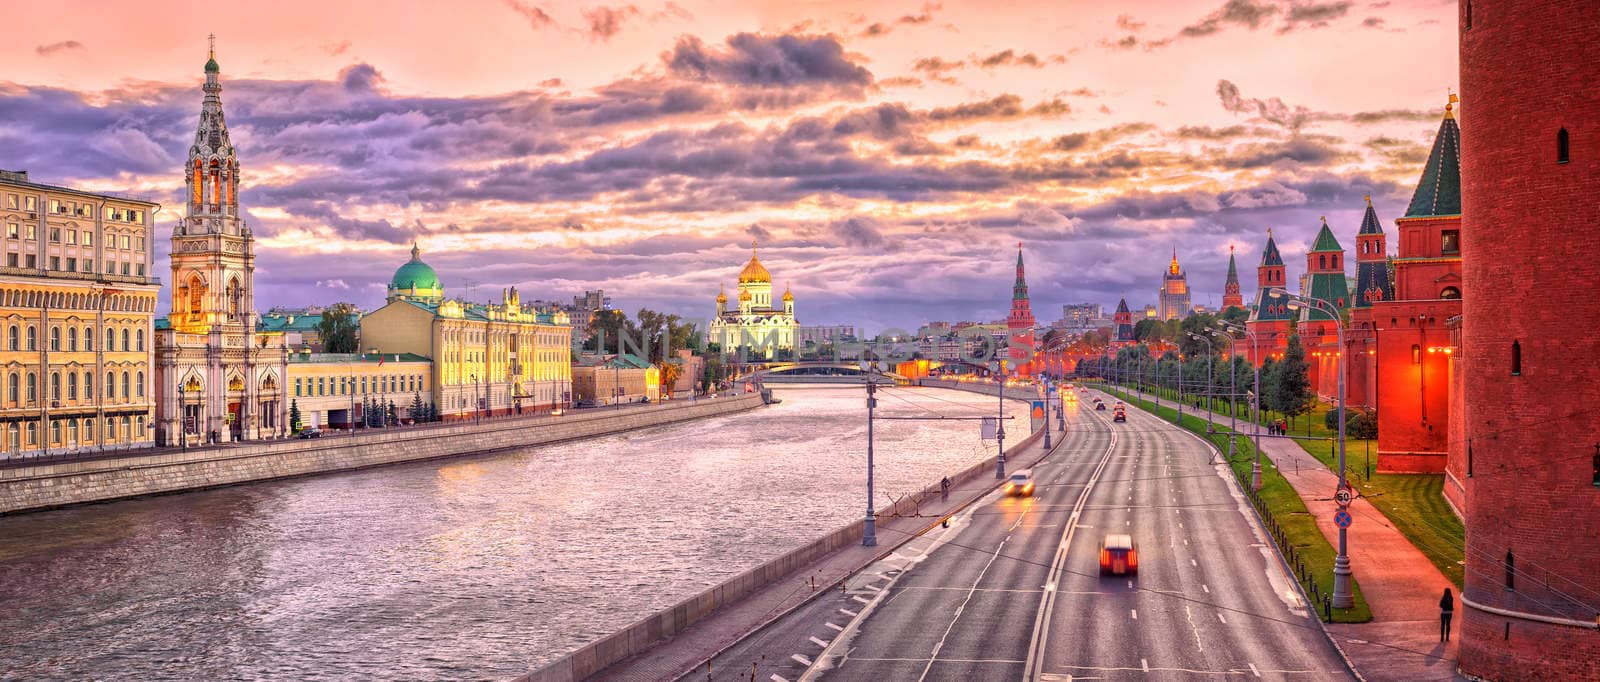 Panoramic view of Moscow Kremlin walls, Christ the Saviour Cathedral and Moskva River at evening light, Moscow, Russia